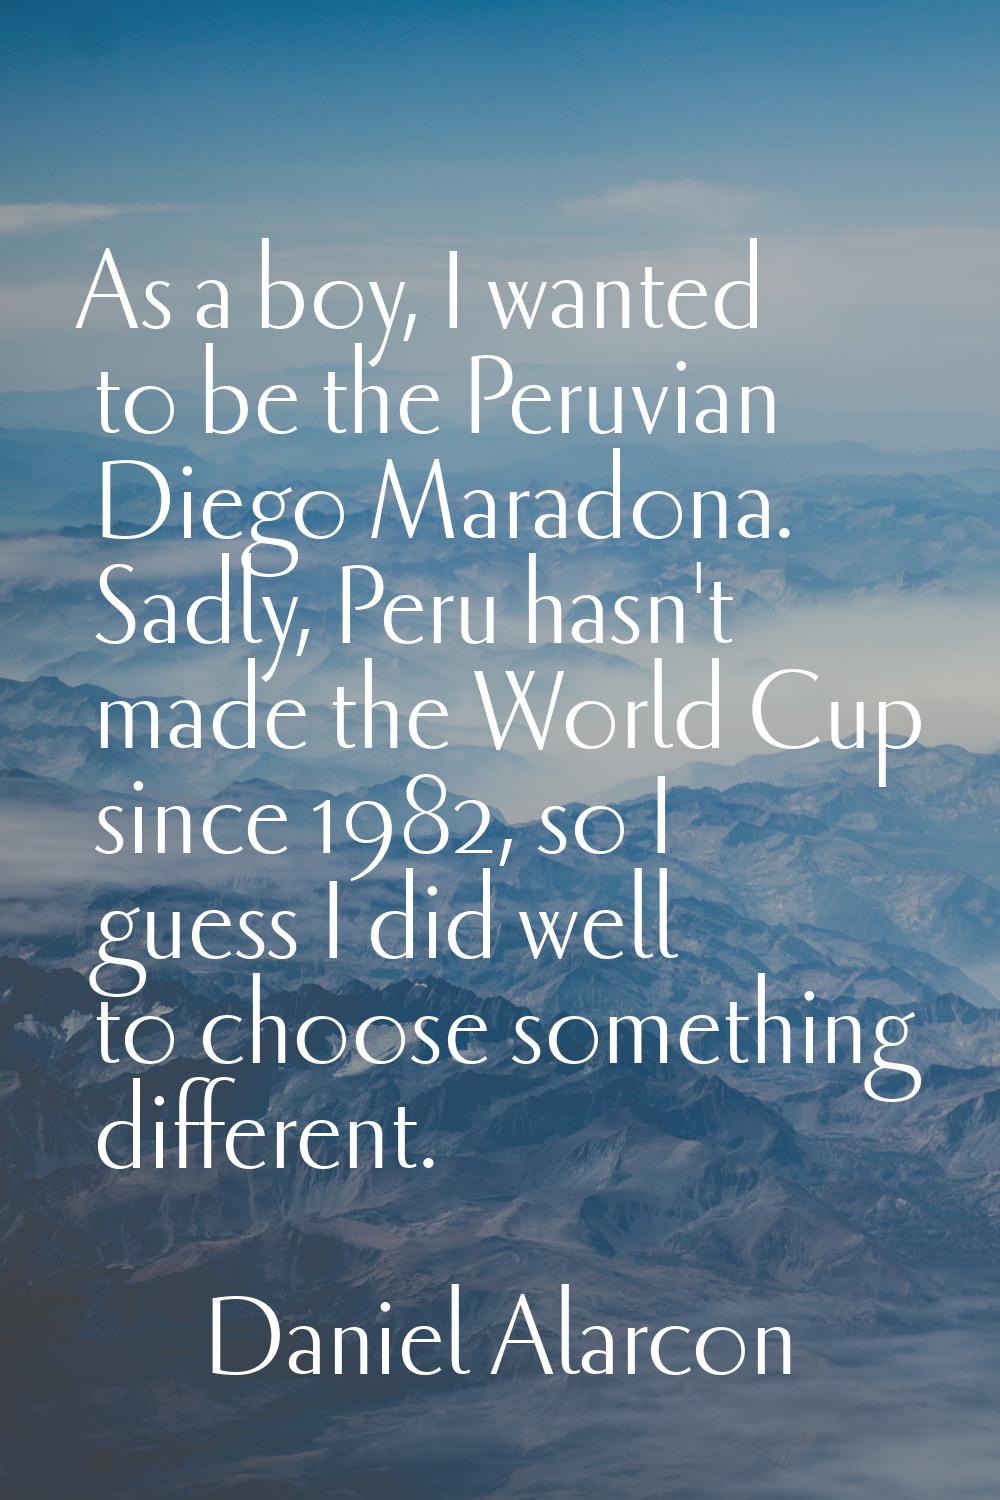 As a boy, I wanted to be the Peruvian Diego Maradona. Sadly, Peru hasn't made the World Cup since 1